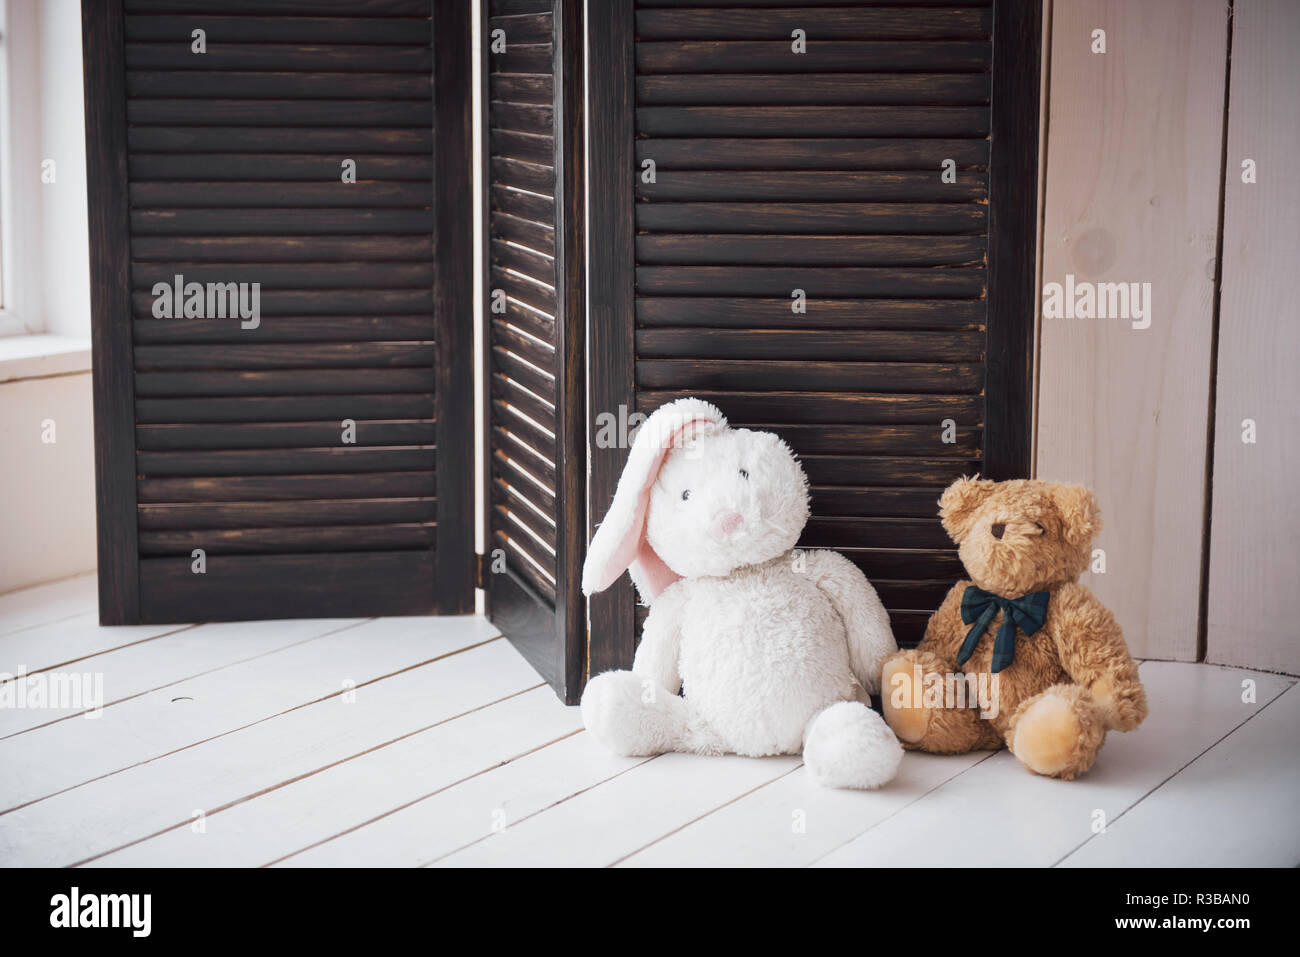 Two enamored teddy toys bear and bunny sitting next to Stock Photo